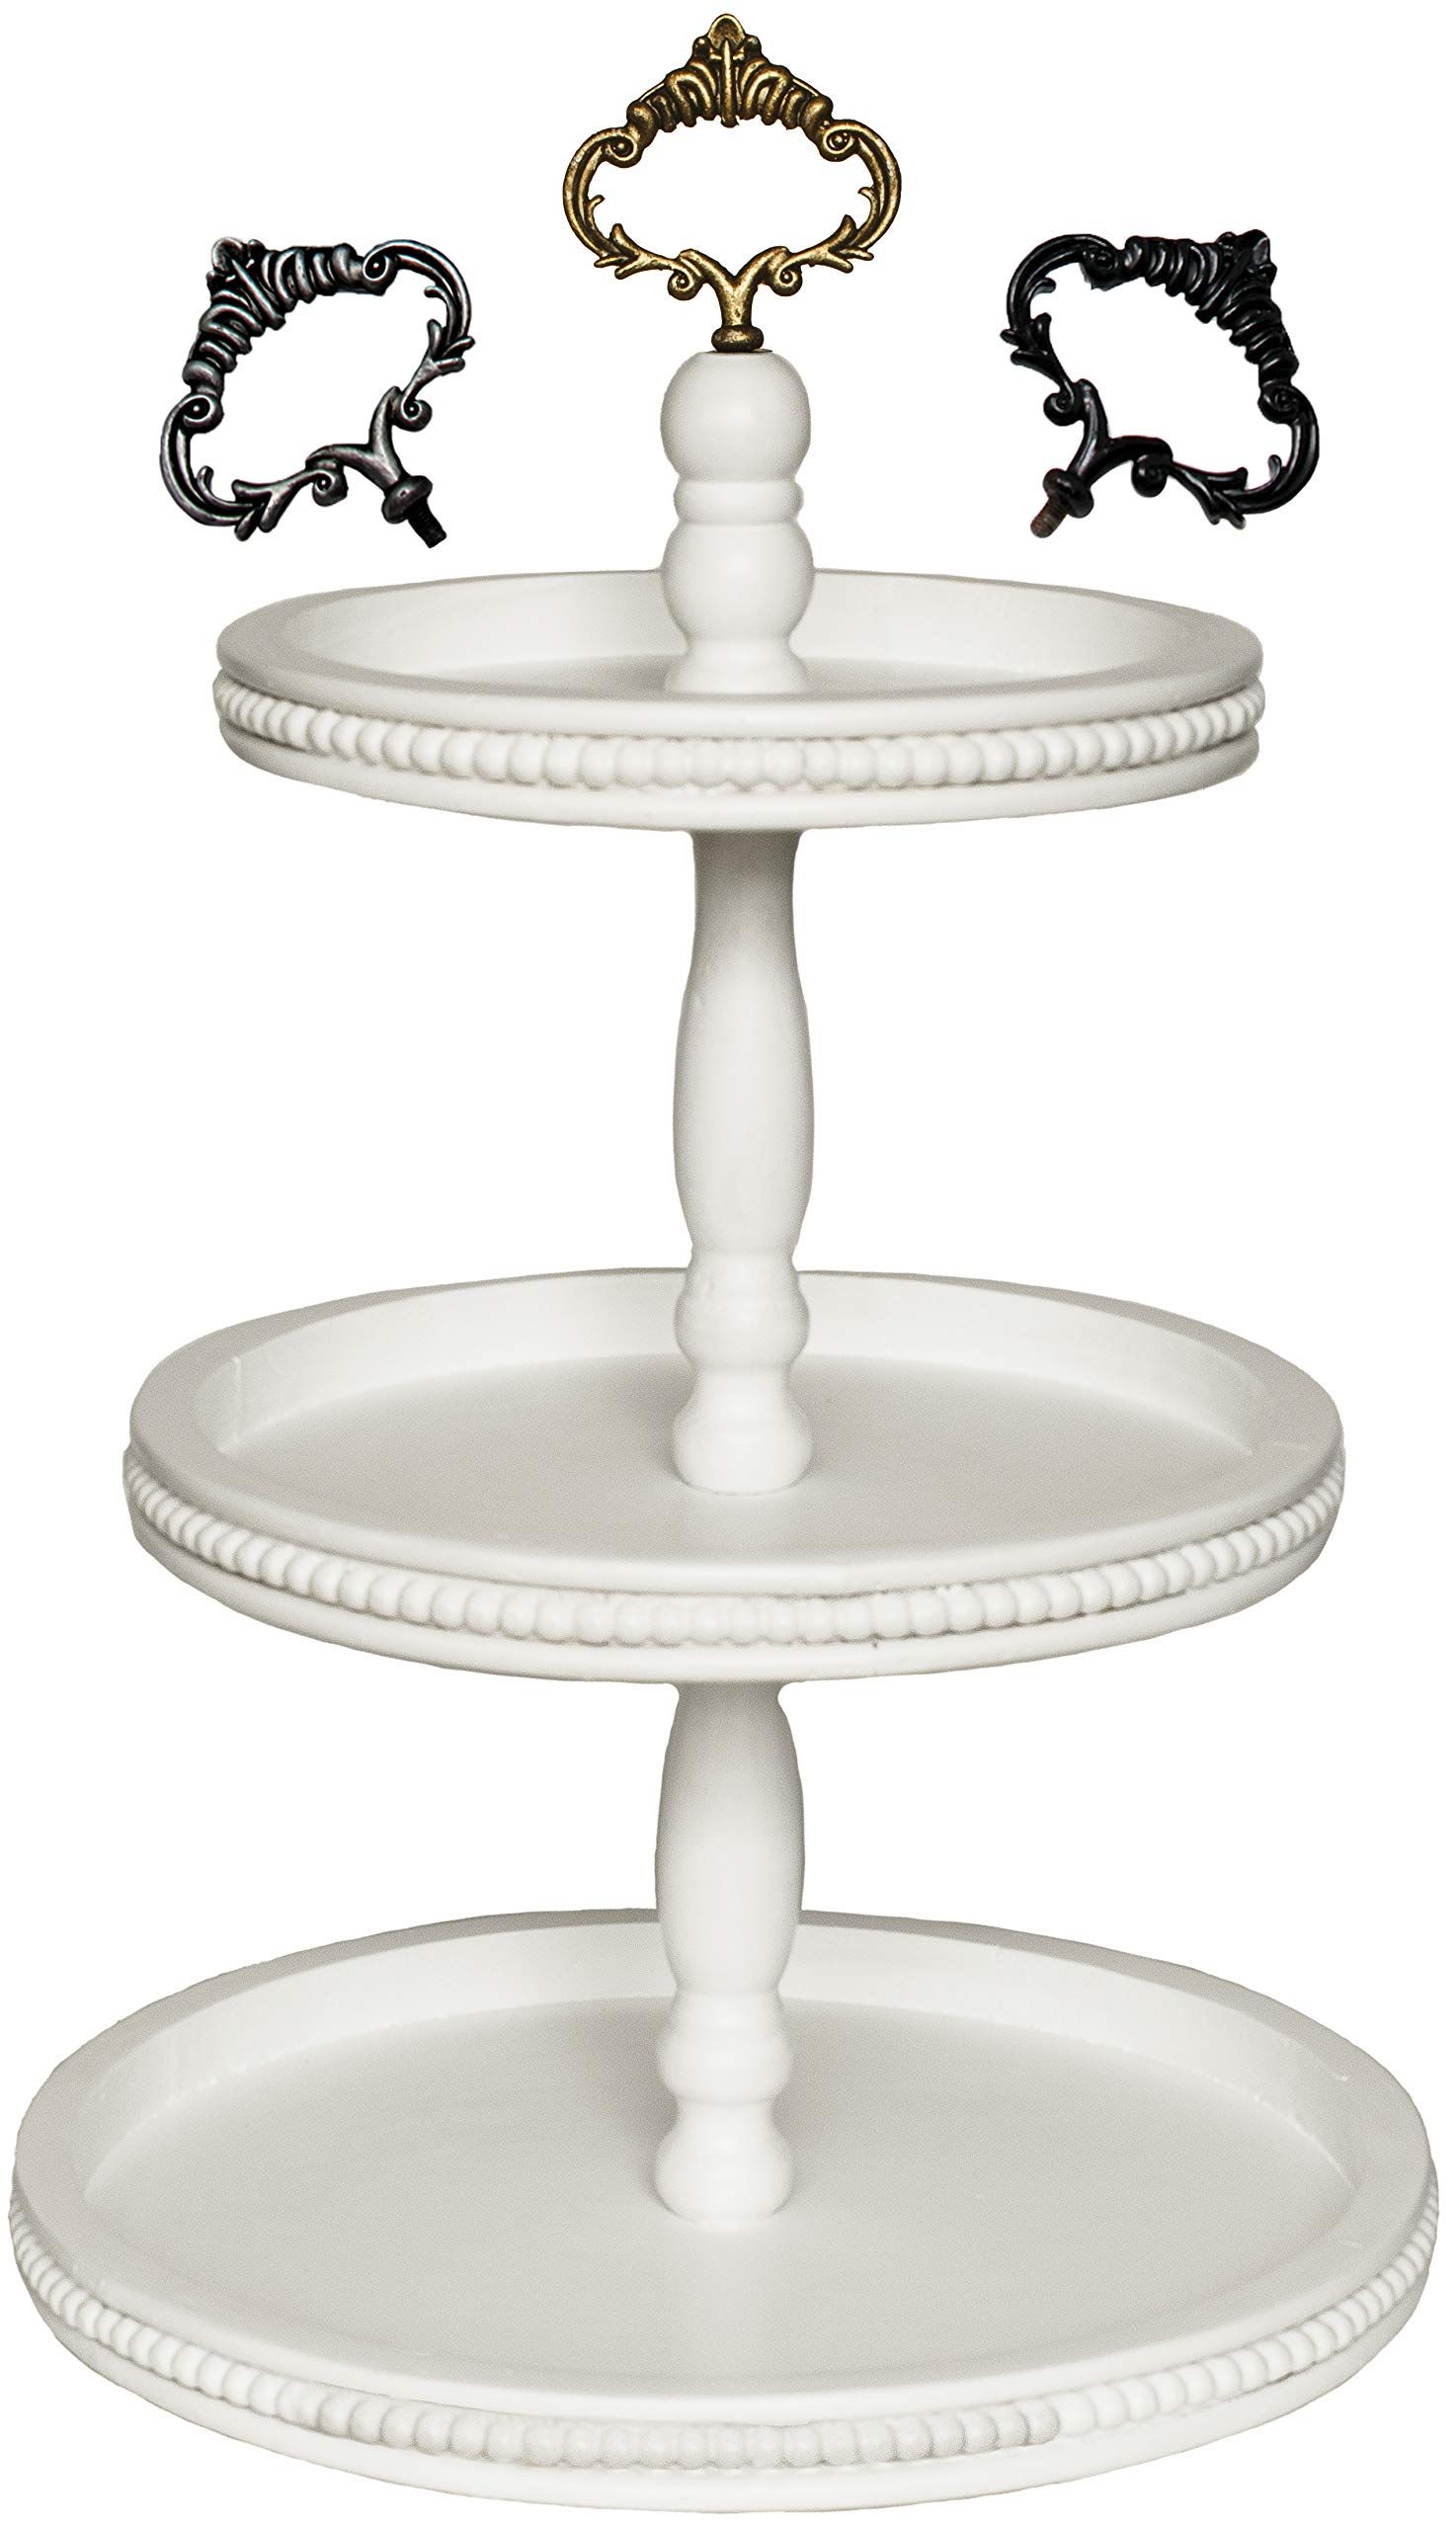 3 Tiered Tray Wooden Serving Stand by Felt Creative Home Goods. Large Shabby Chic Beaded Tray for Ho | Amazon (US)